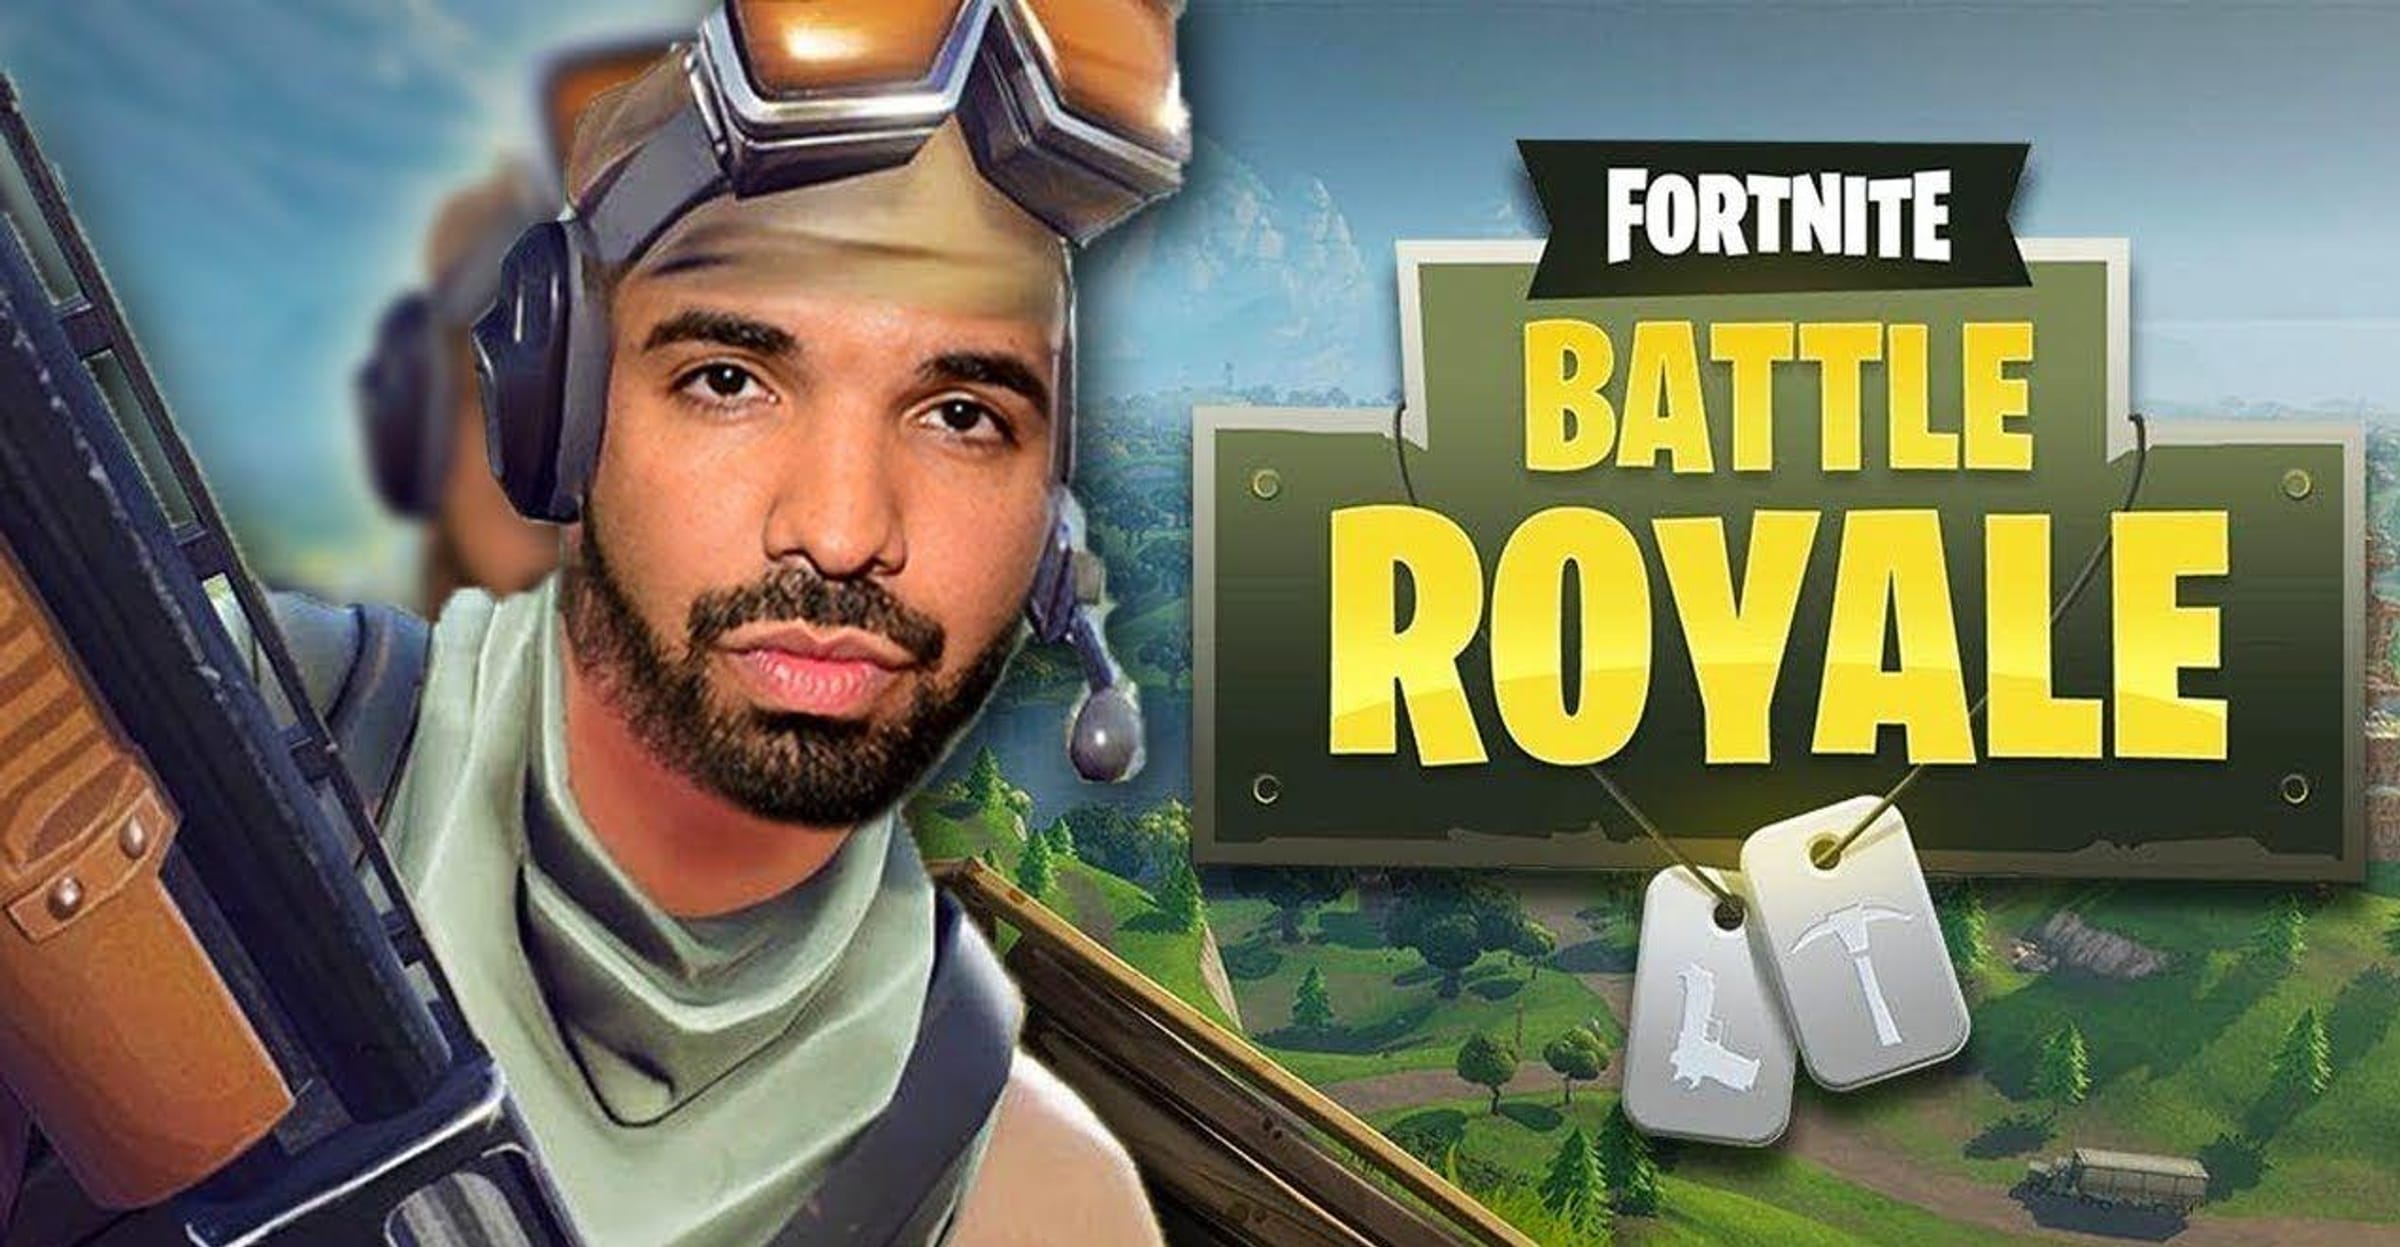 Fortnite Best Players in 2023 - Our Top 5 List